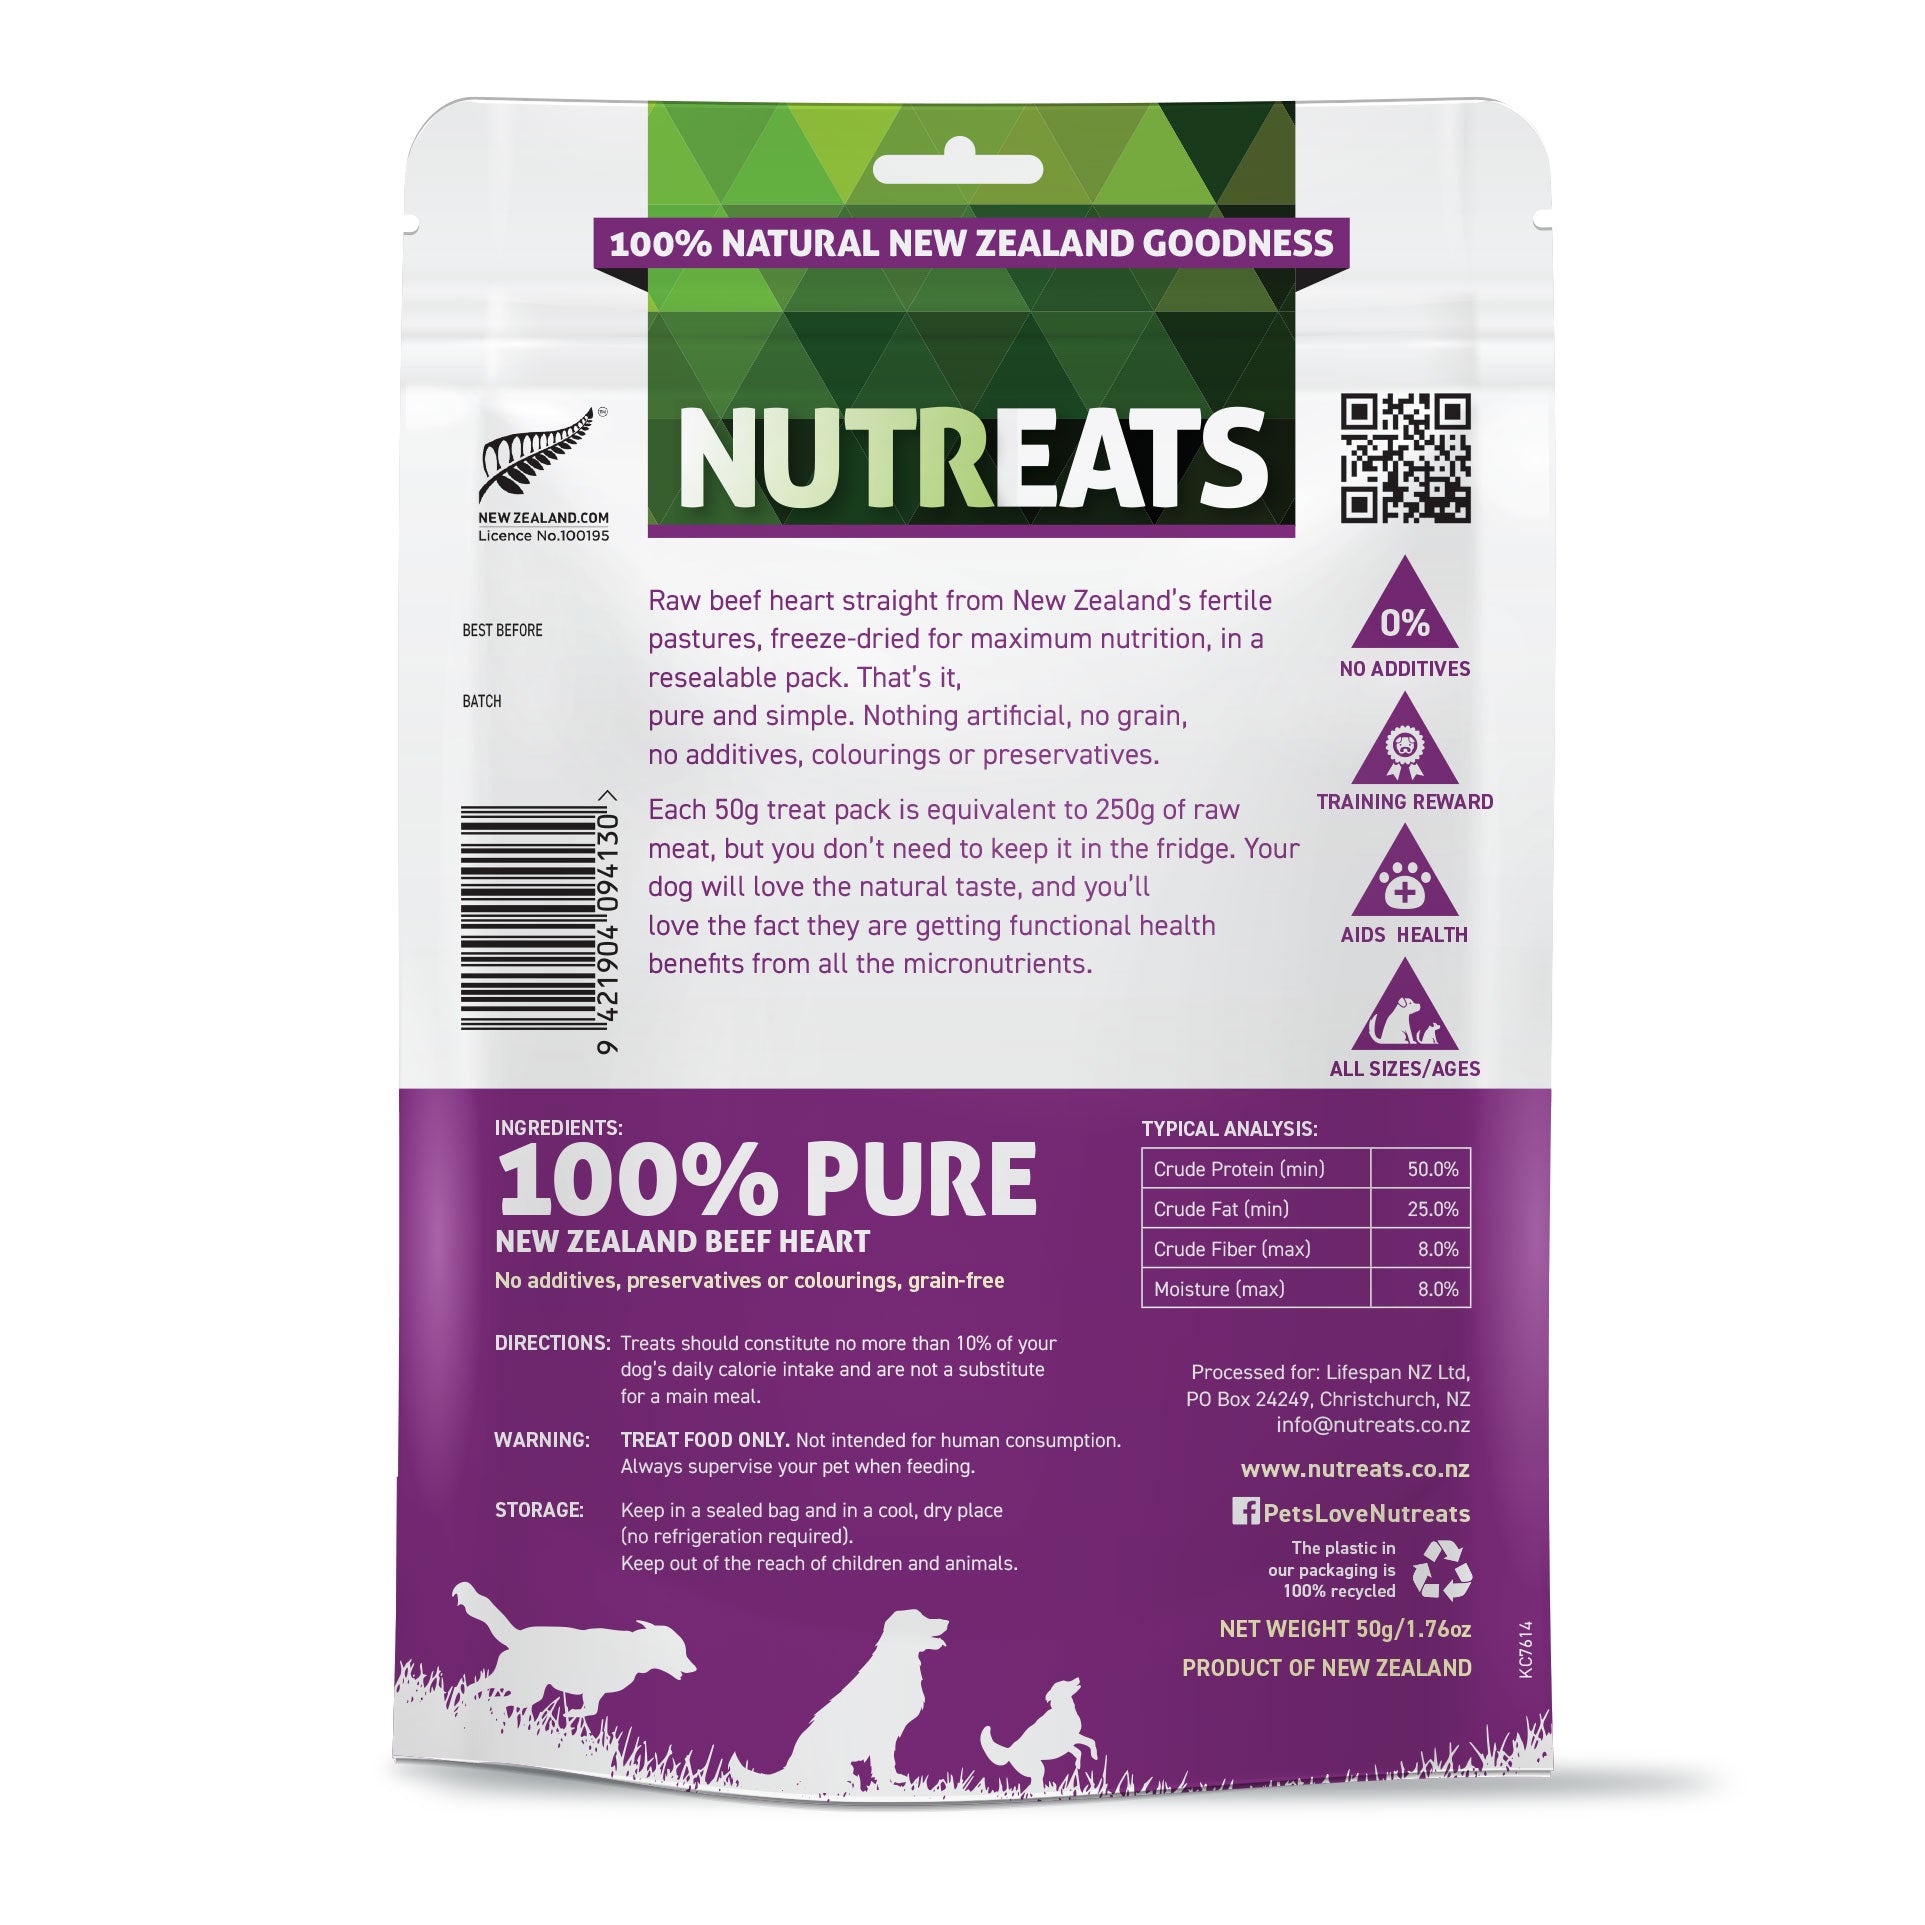 Nutreats Beef Heart for dogs - training treat packed with nutrients and vitamins supporting the health and wellbeing of your dog. Not additives and aids health of your dog , suitable for all ages and sizes of dog.